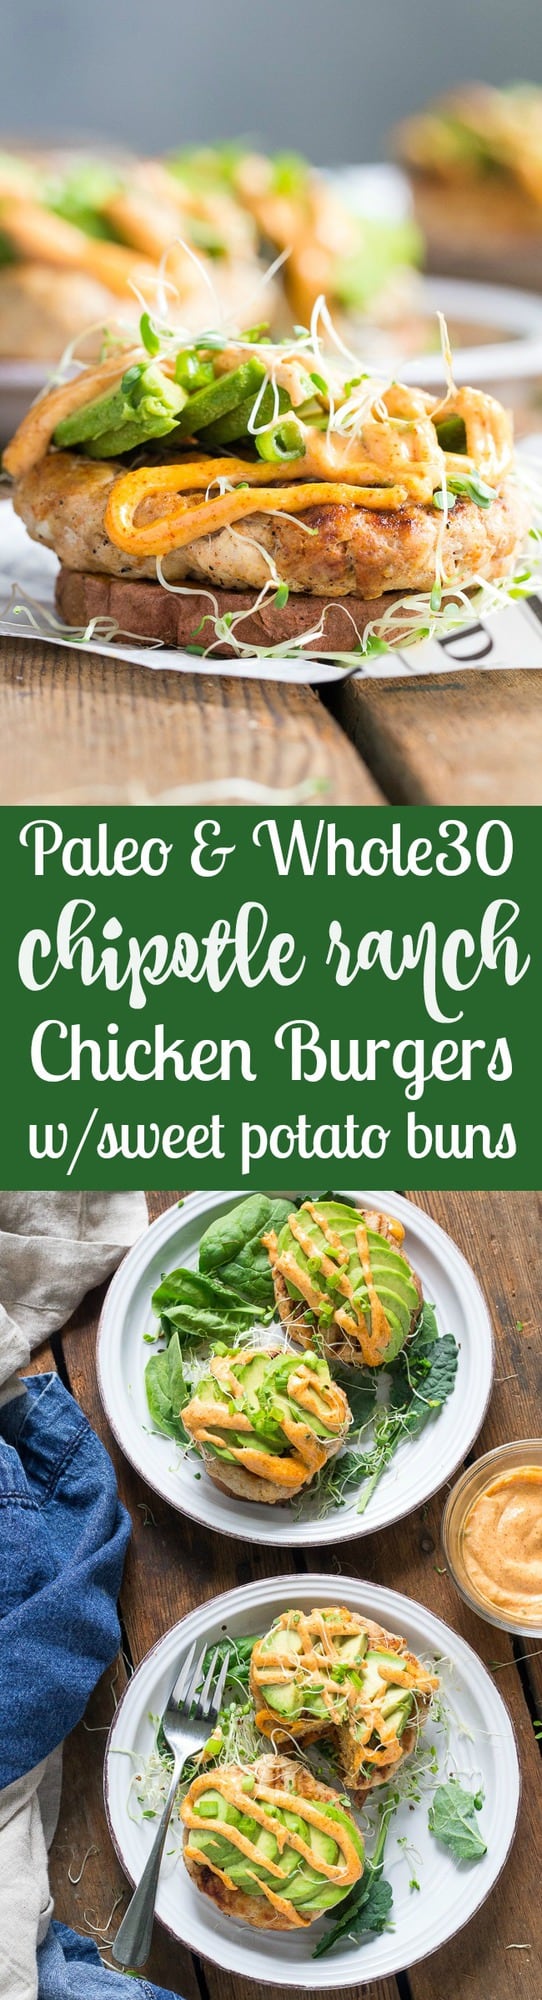 hese Chipotle Ranch Chicken Burgers are loaded with your favorite flavors and perfect on a grilled sweet potato bun!  Topped with chipotle ranch sauce, avocado and sprouts for a delicious, fun, and healthy burger that might become your new favorite!  Paleo, Whole30, gluten-free, dairy-free.